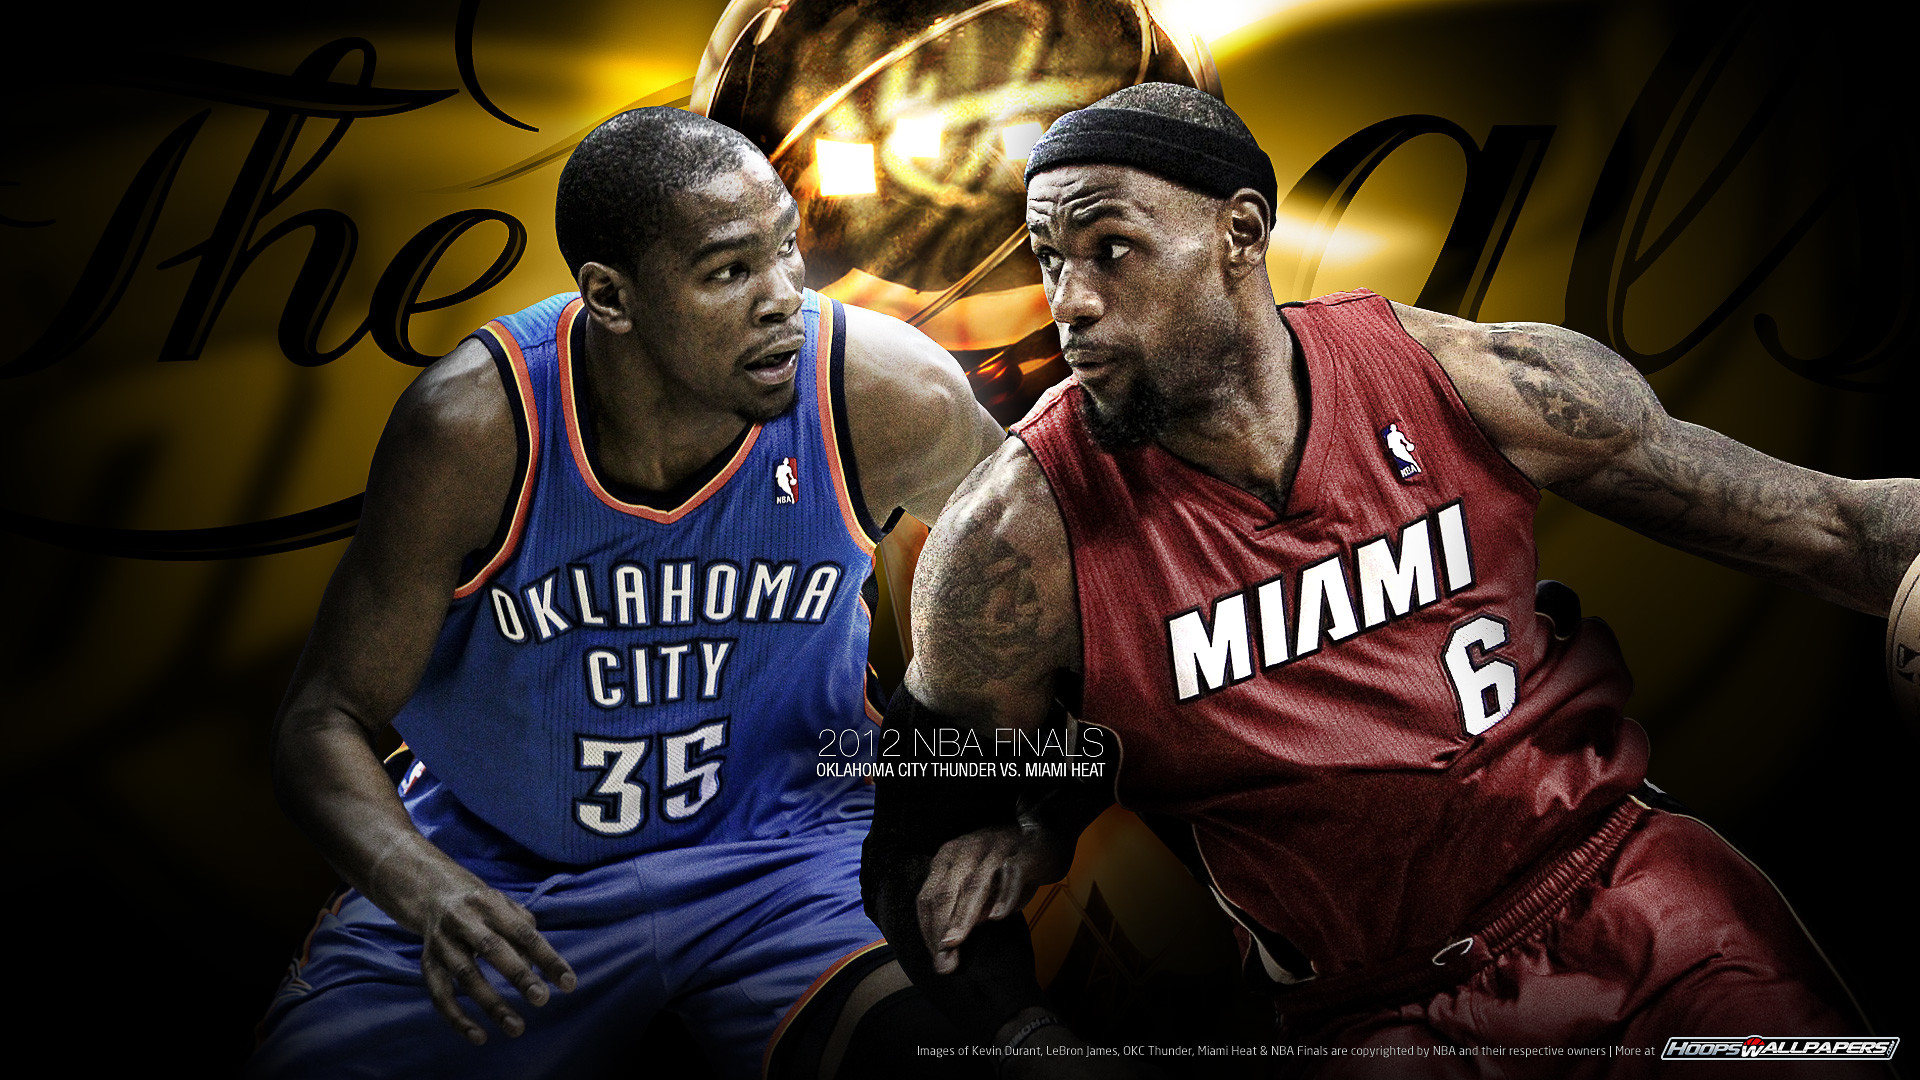 Wallpapers Of NBA Players